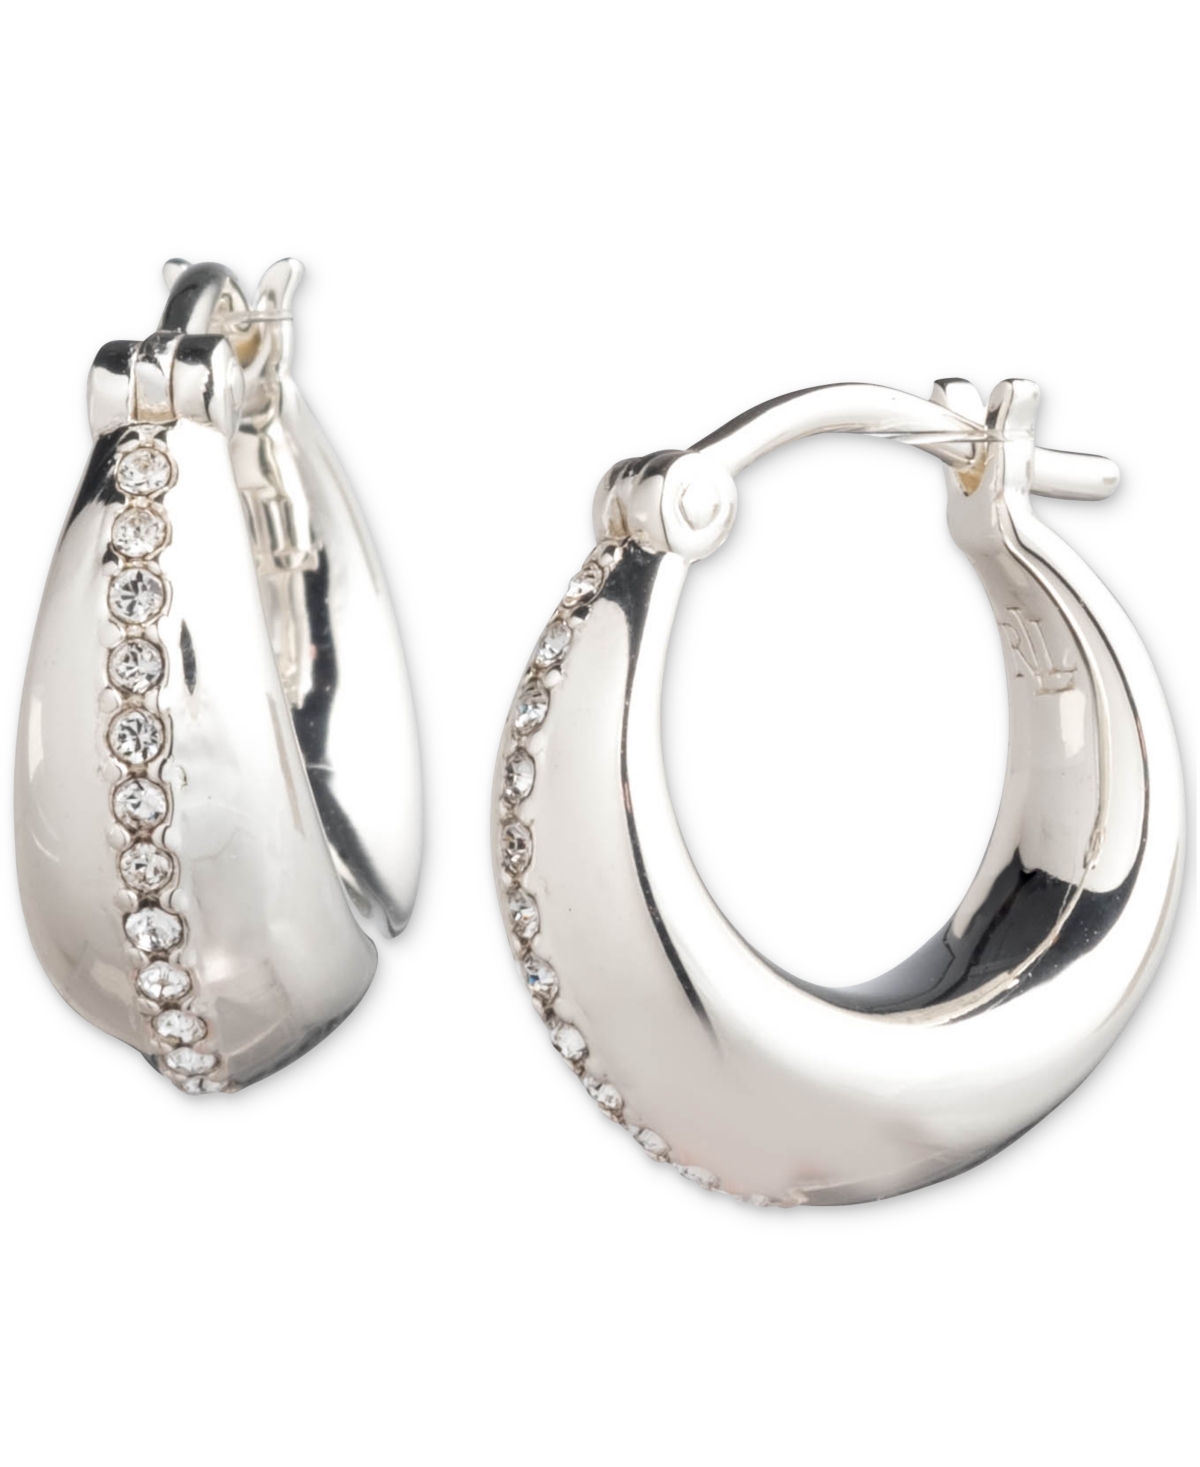 Lauren Ralph Lauren Sterling Silver Extra-Small Pave Sculpted Hoop Earrings, 0.37" - Crystal Wh